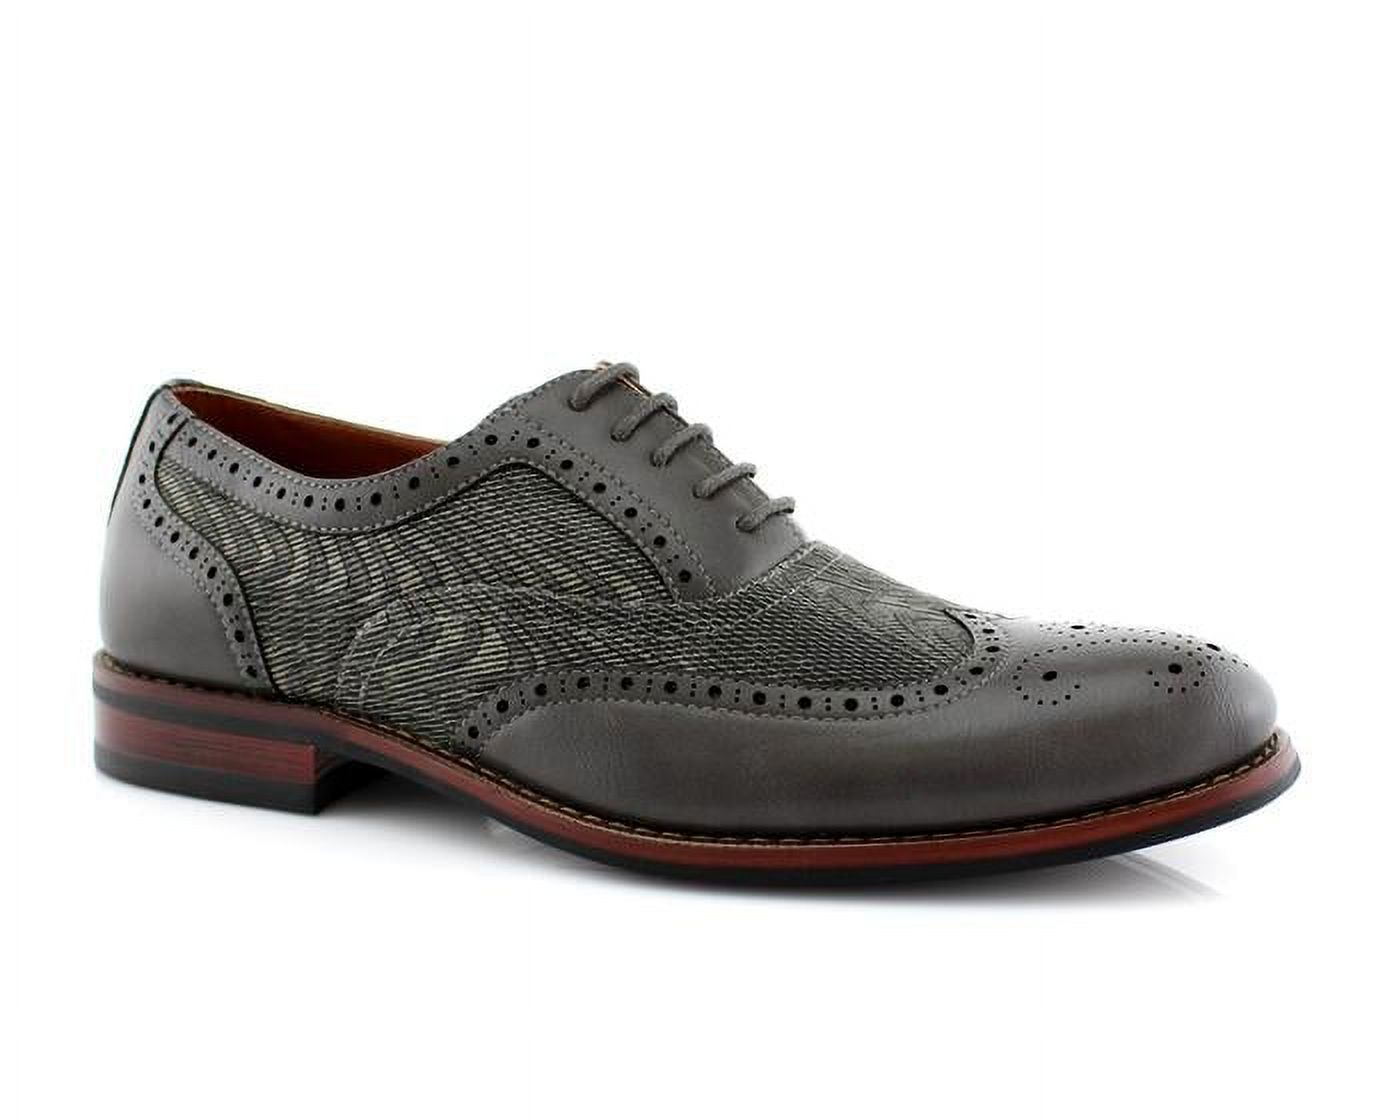 Ferro Aldo Alan M139001G Mens Classic Perforated Duo-Texture Lace-up Wingtip Oxford Dress Shoes - image 1 of 3